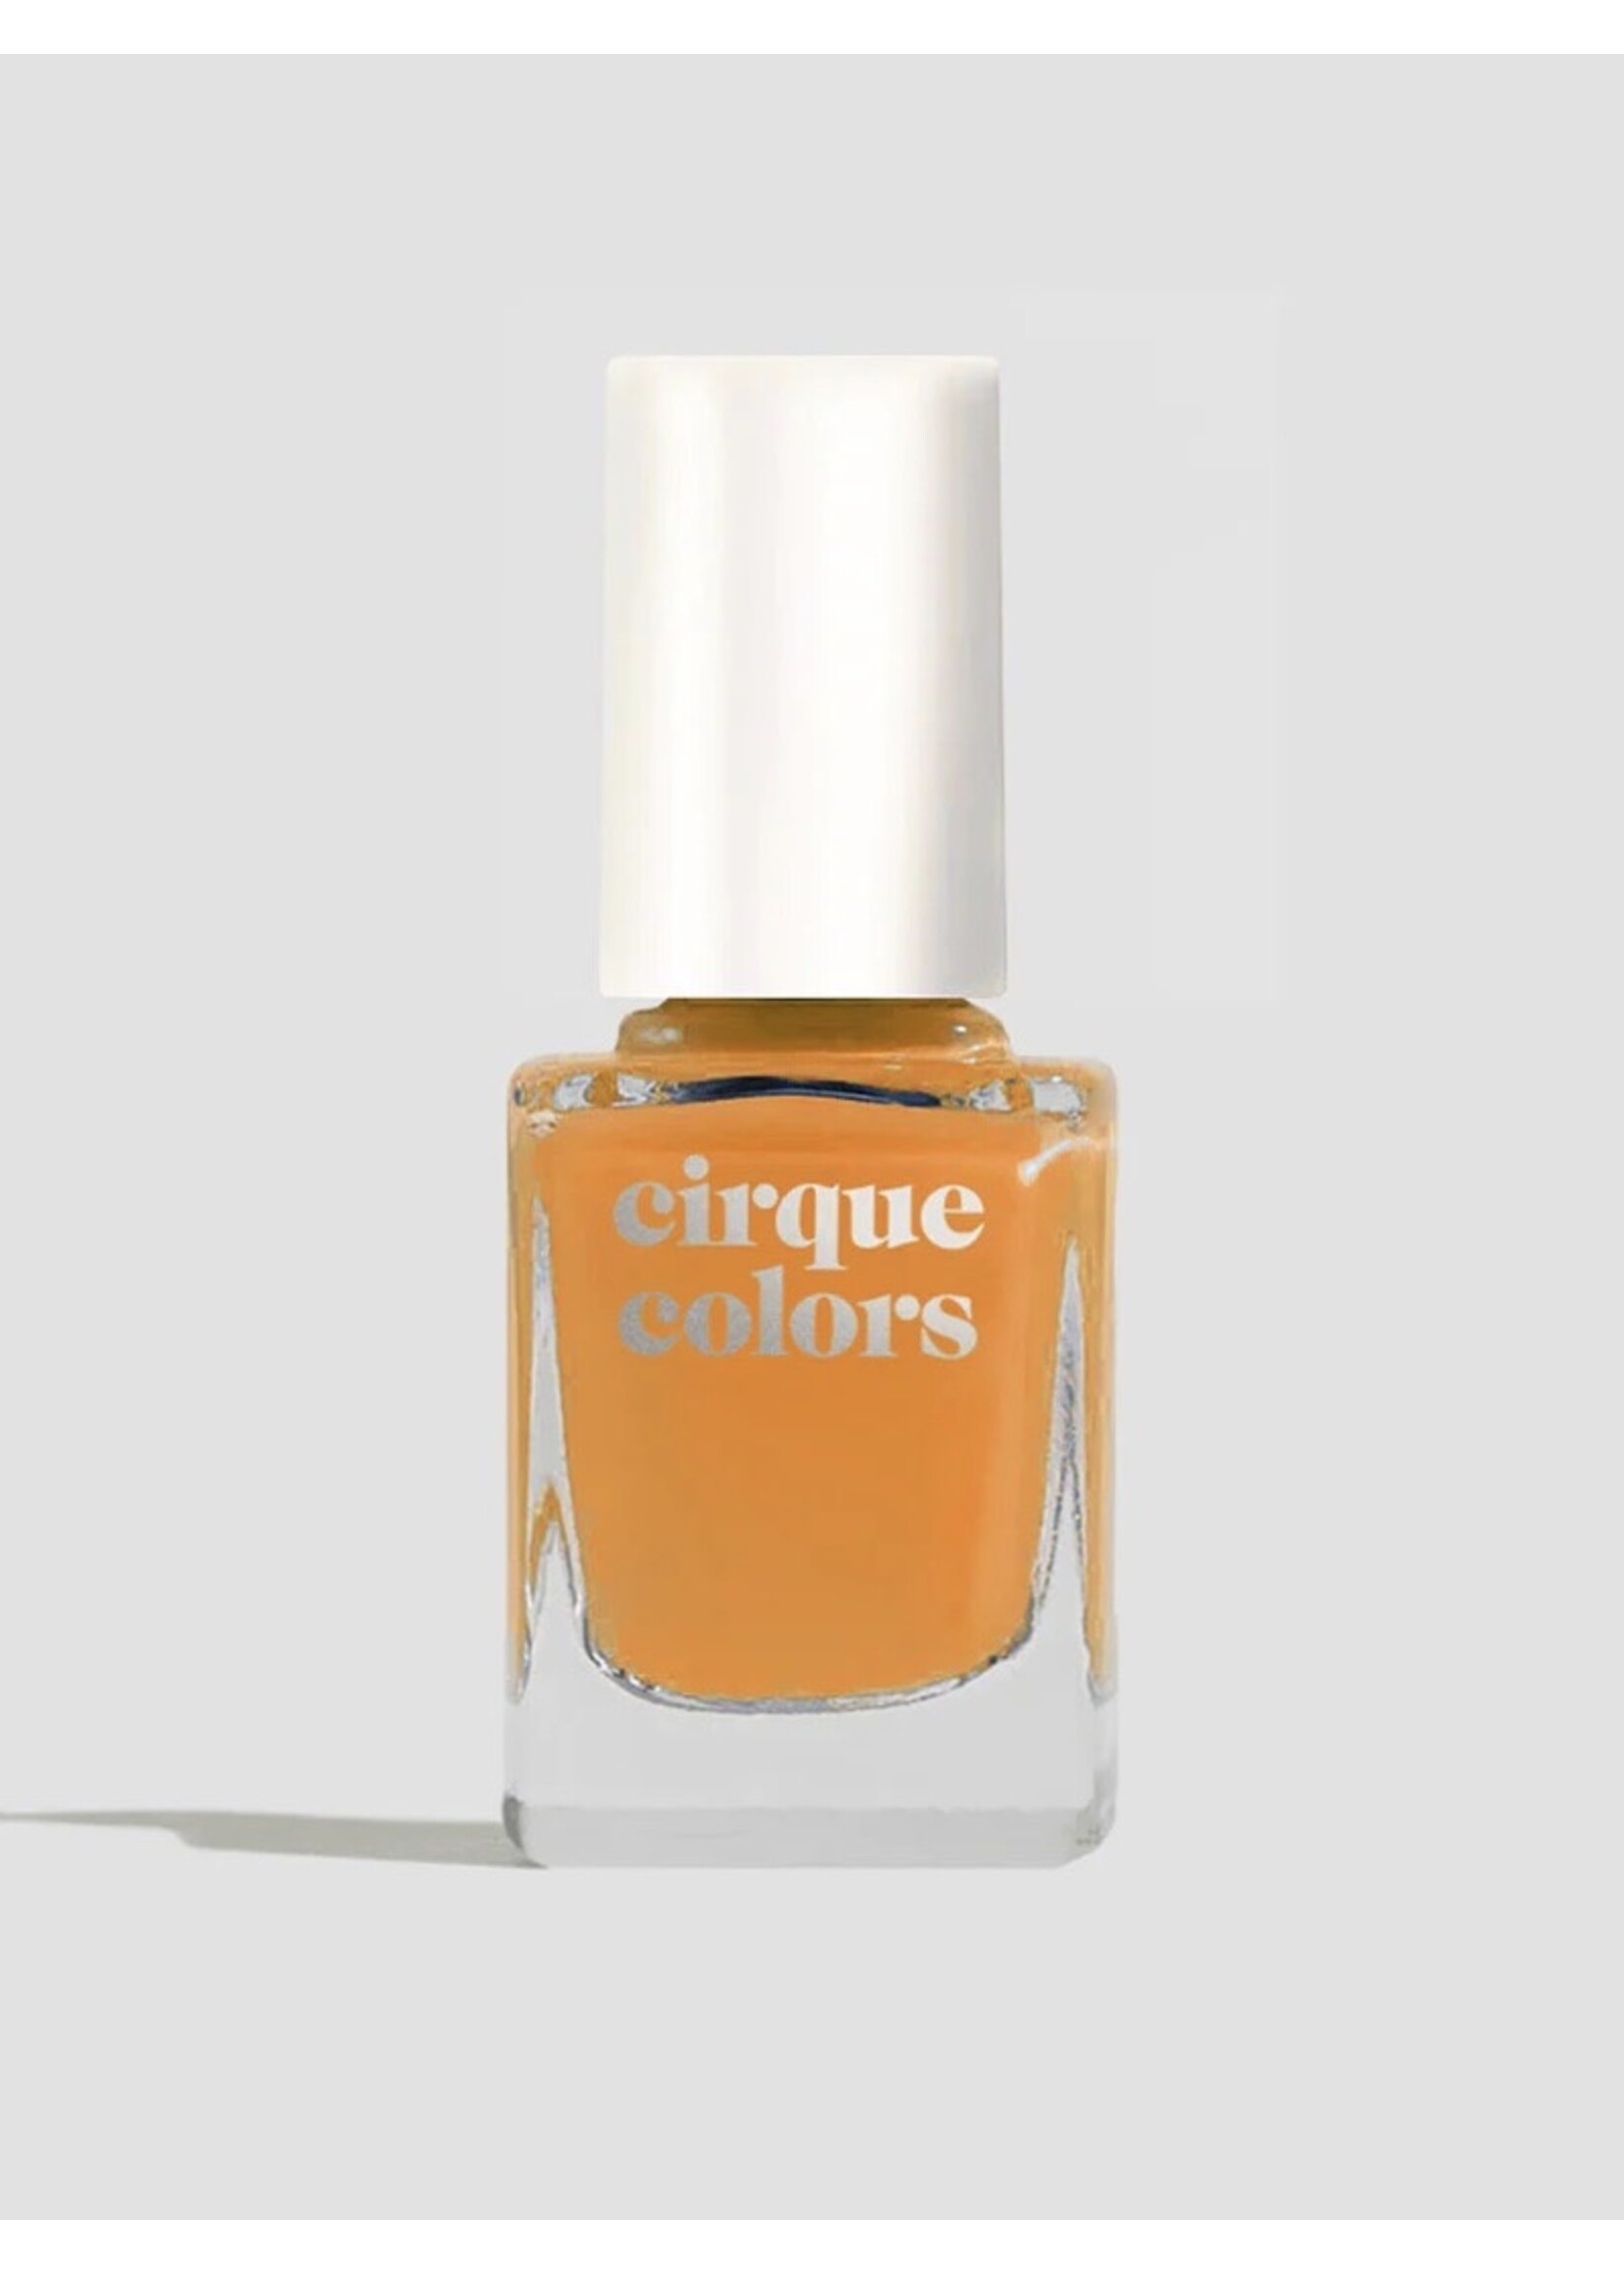 Cirque Colors Nail Polishes "Jelly" by Cirque Colors